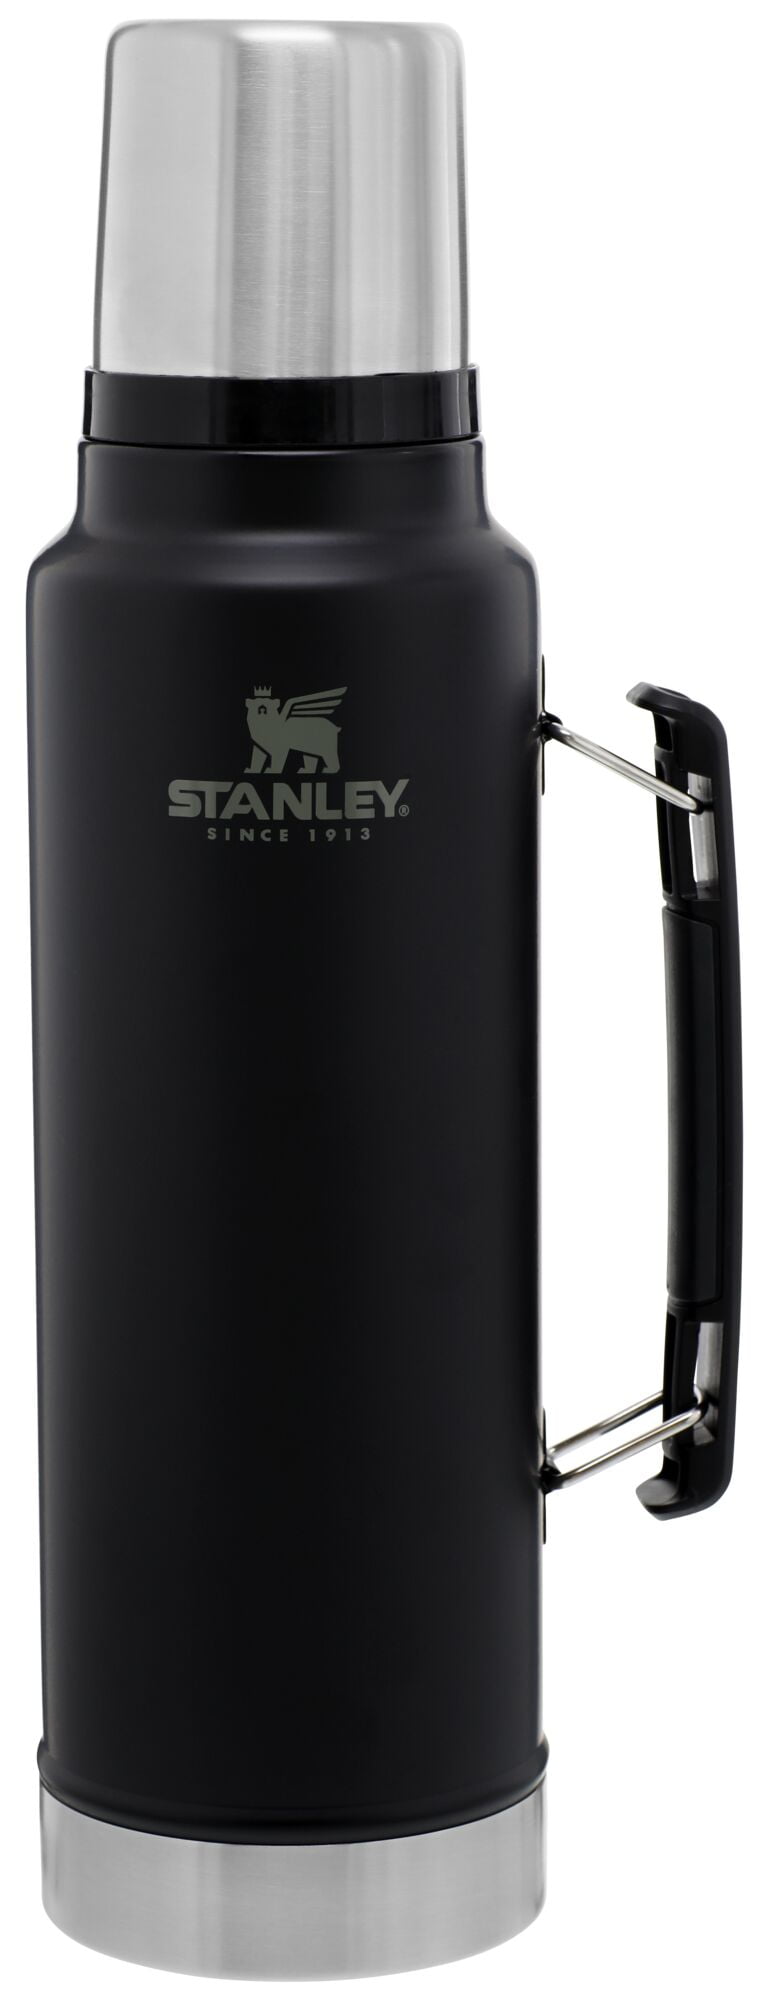 STANLEY CLASSIC DRINKS FLASK LITRE STAINLESS STEEL THERMOS HOT COLD TRAVEL FOOD 